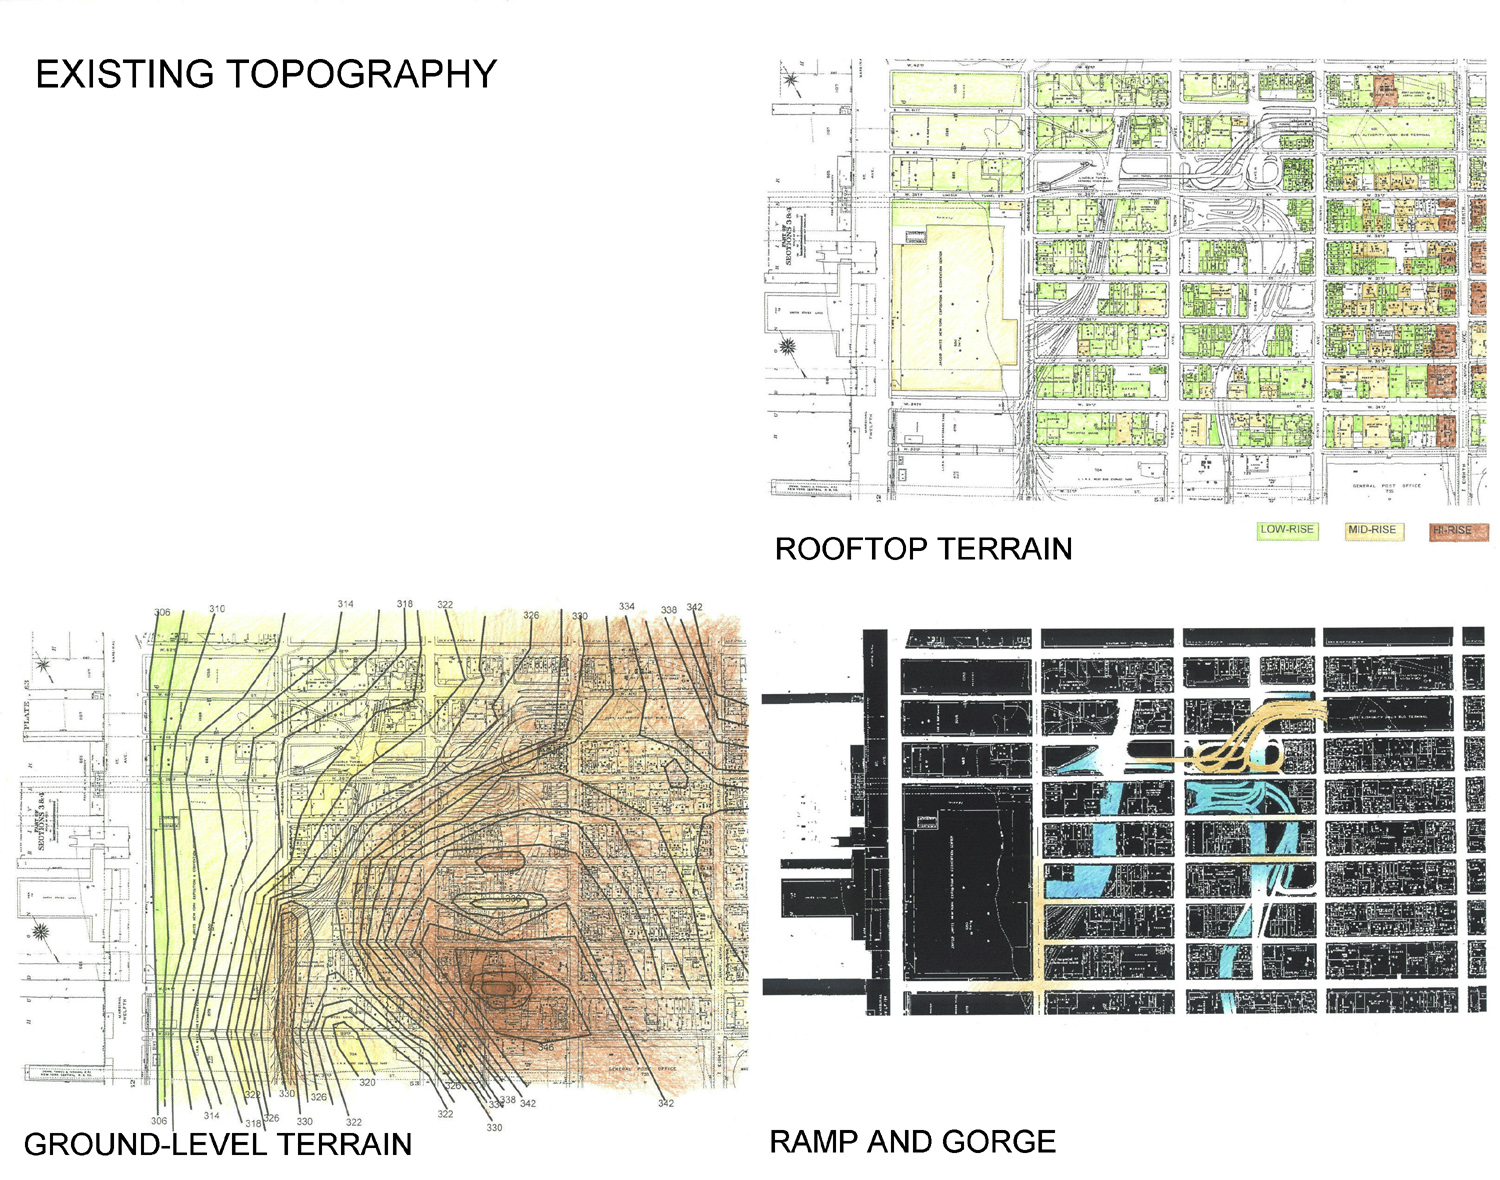  Observations on existing topography 